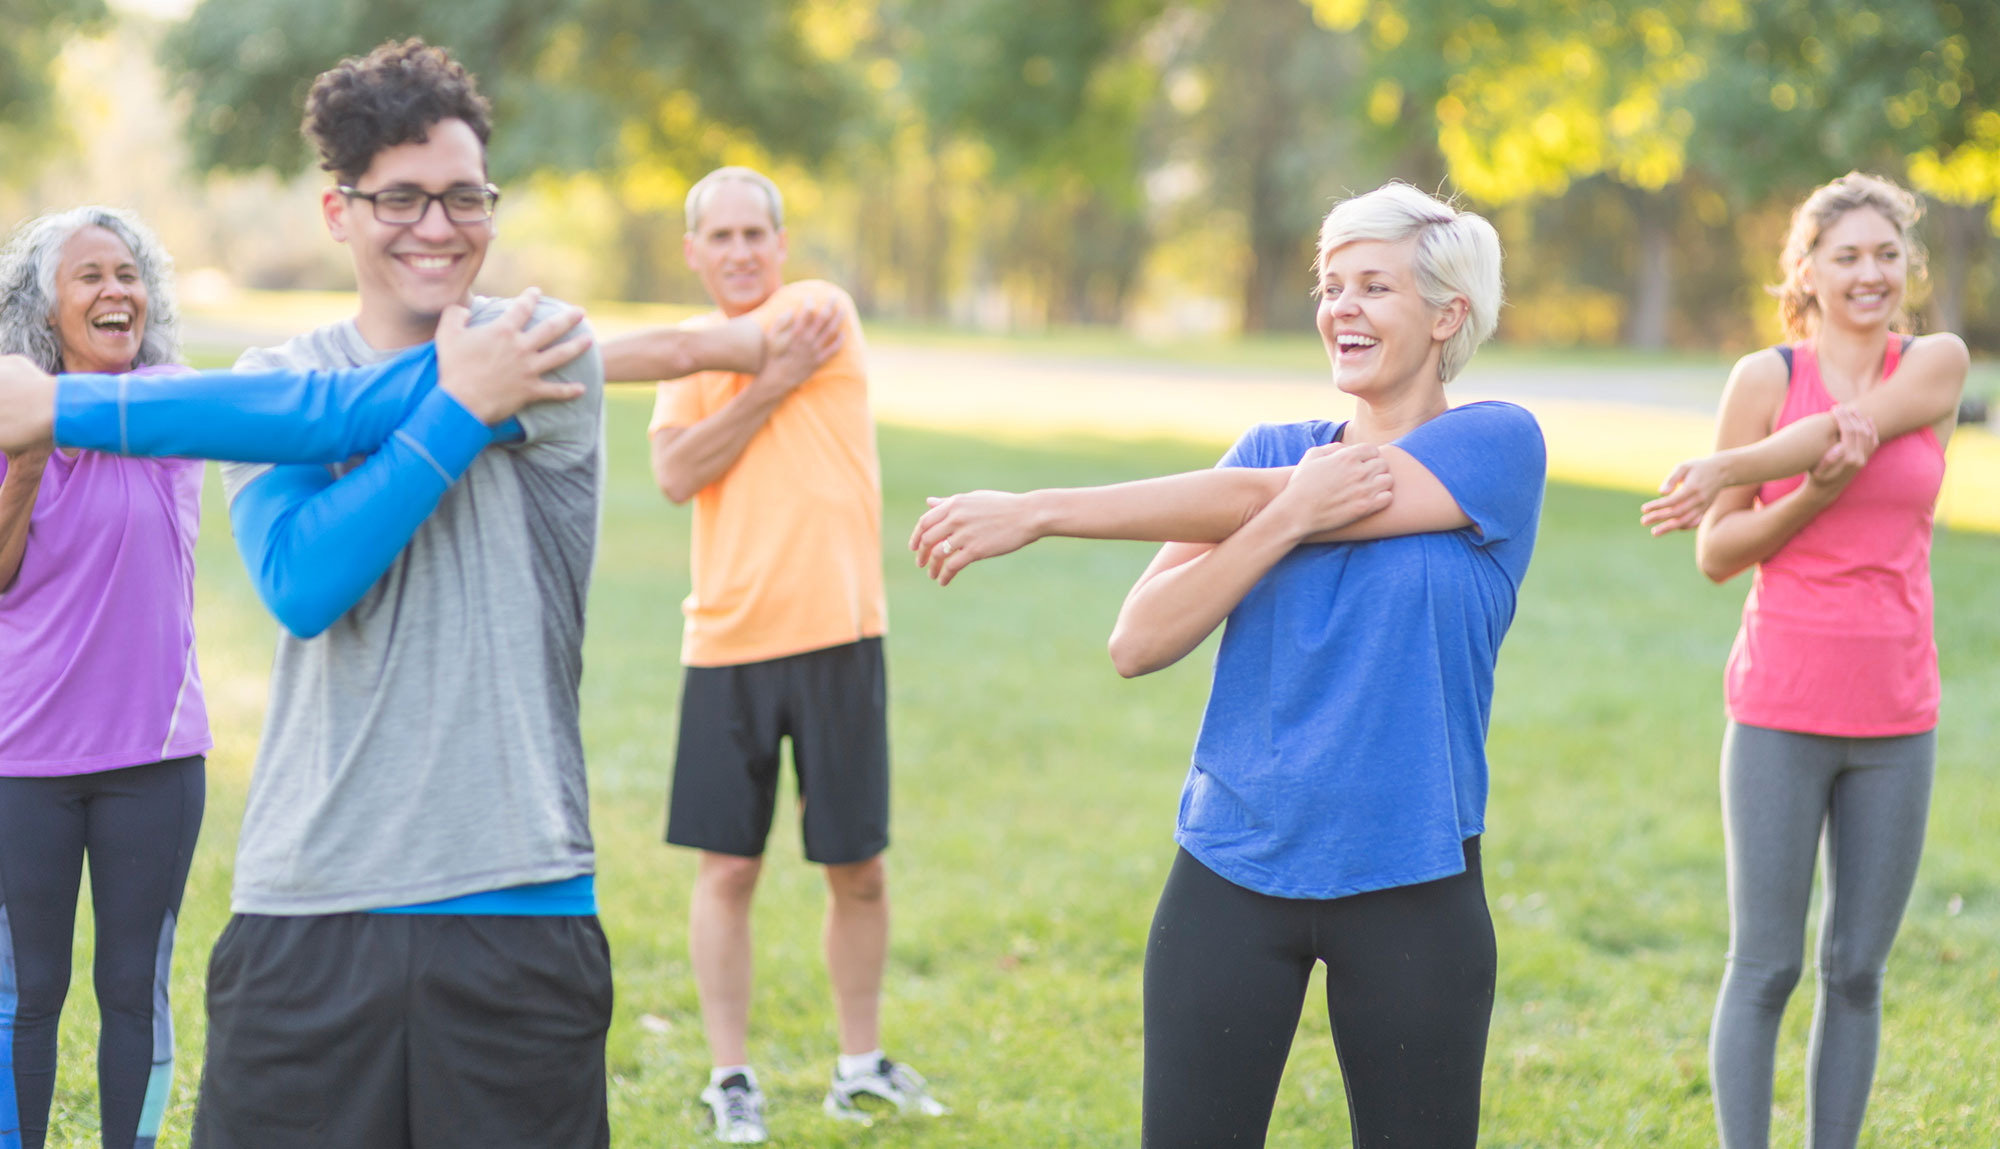 A fitness group of five people stretch their arms together while smiling and laughing on the lawn of a park.